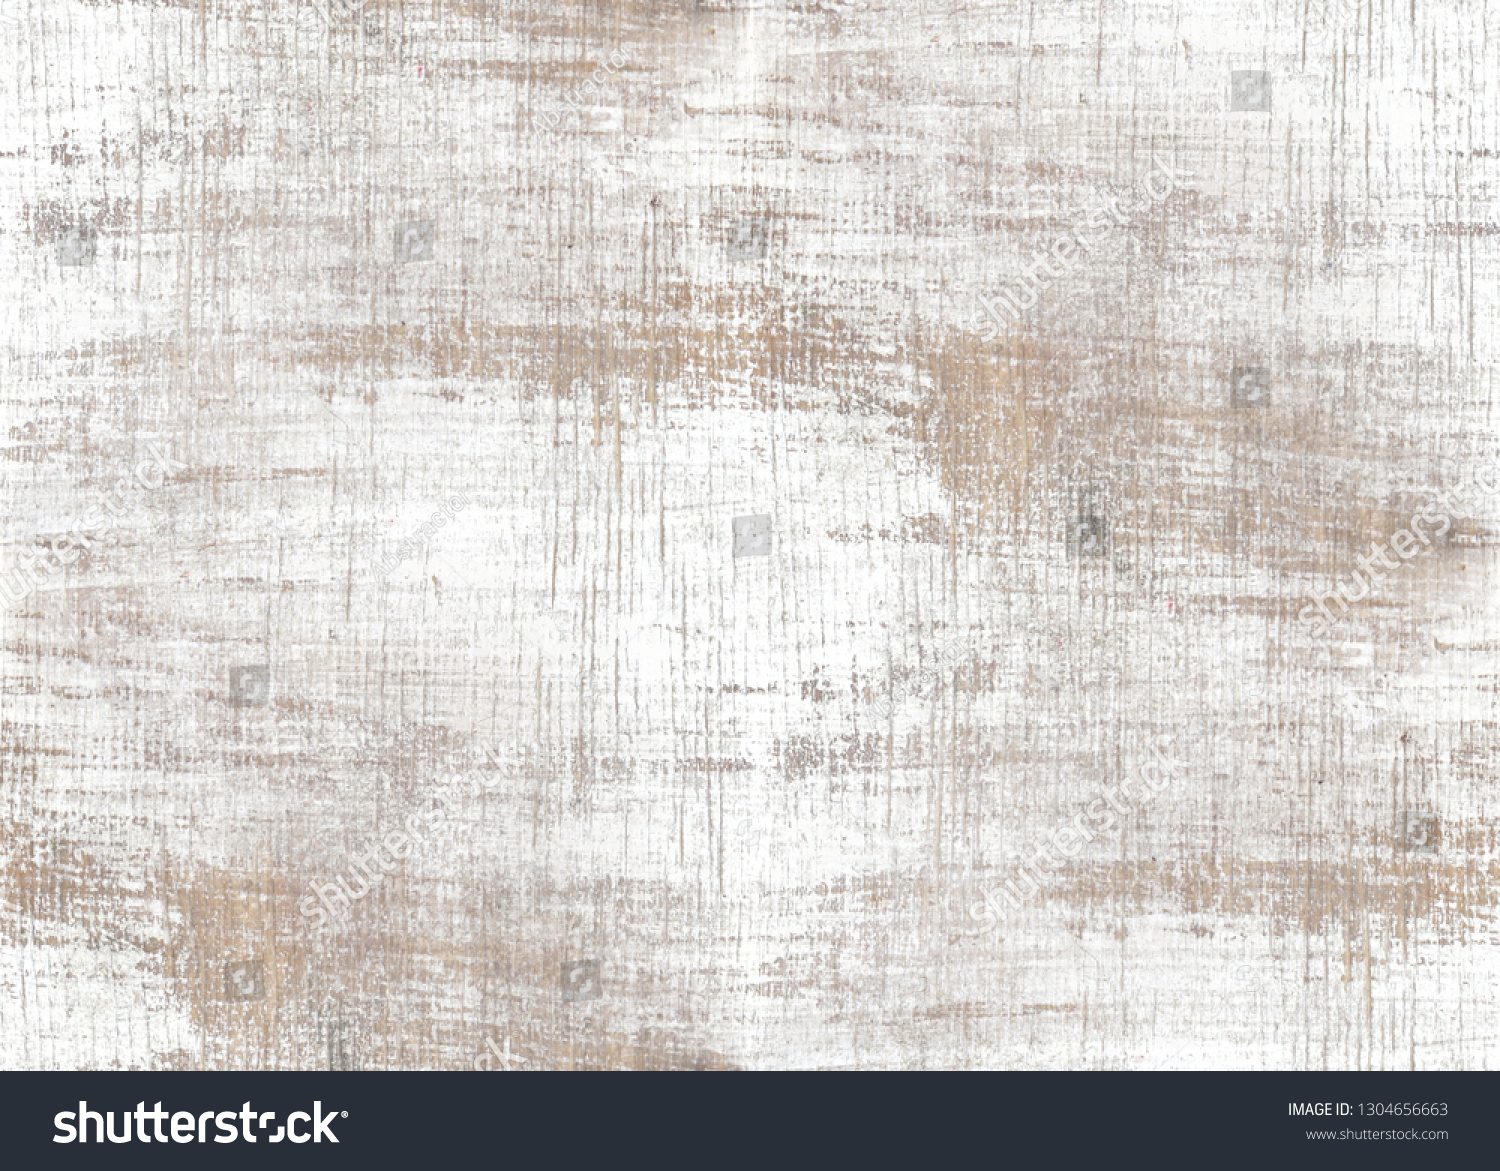 old wood texture distressed grunge background, scratched white paint on planks of wood wall, seamless background #1304656663